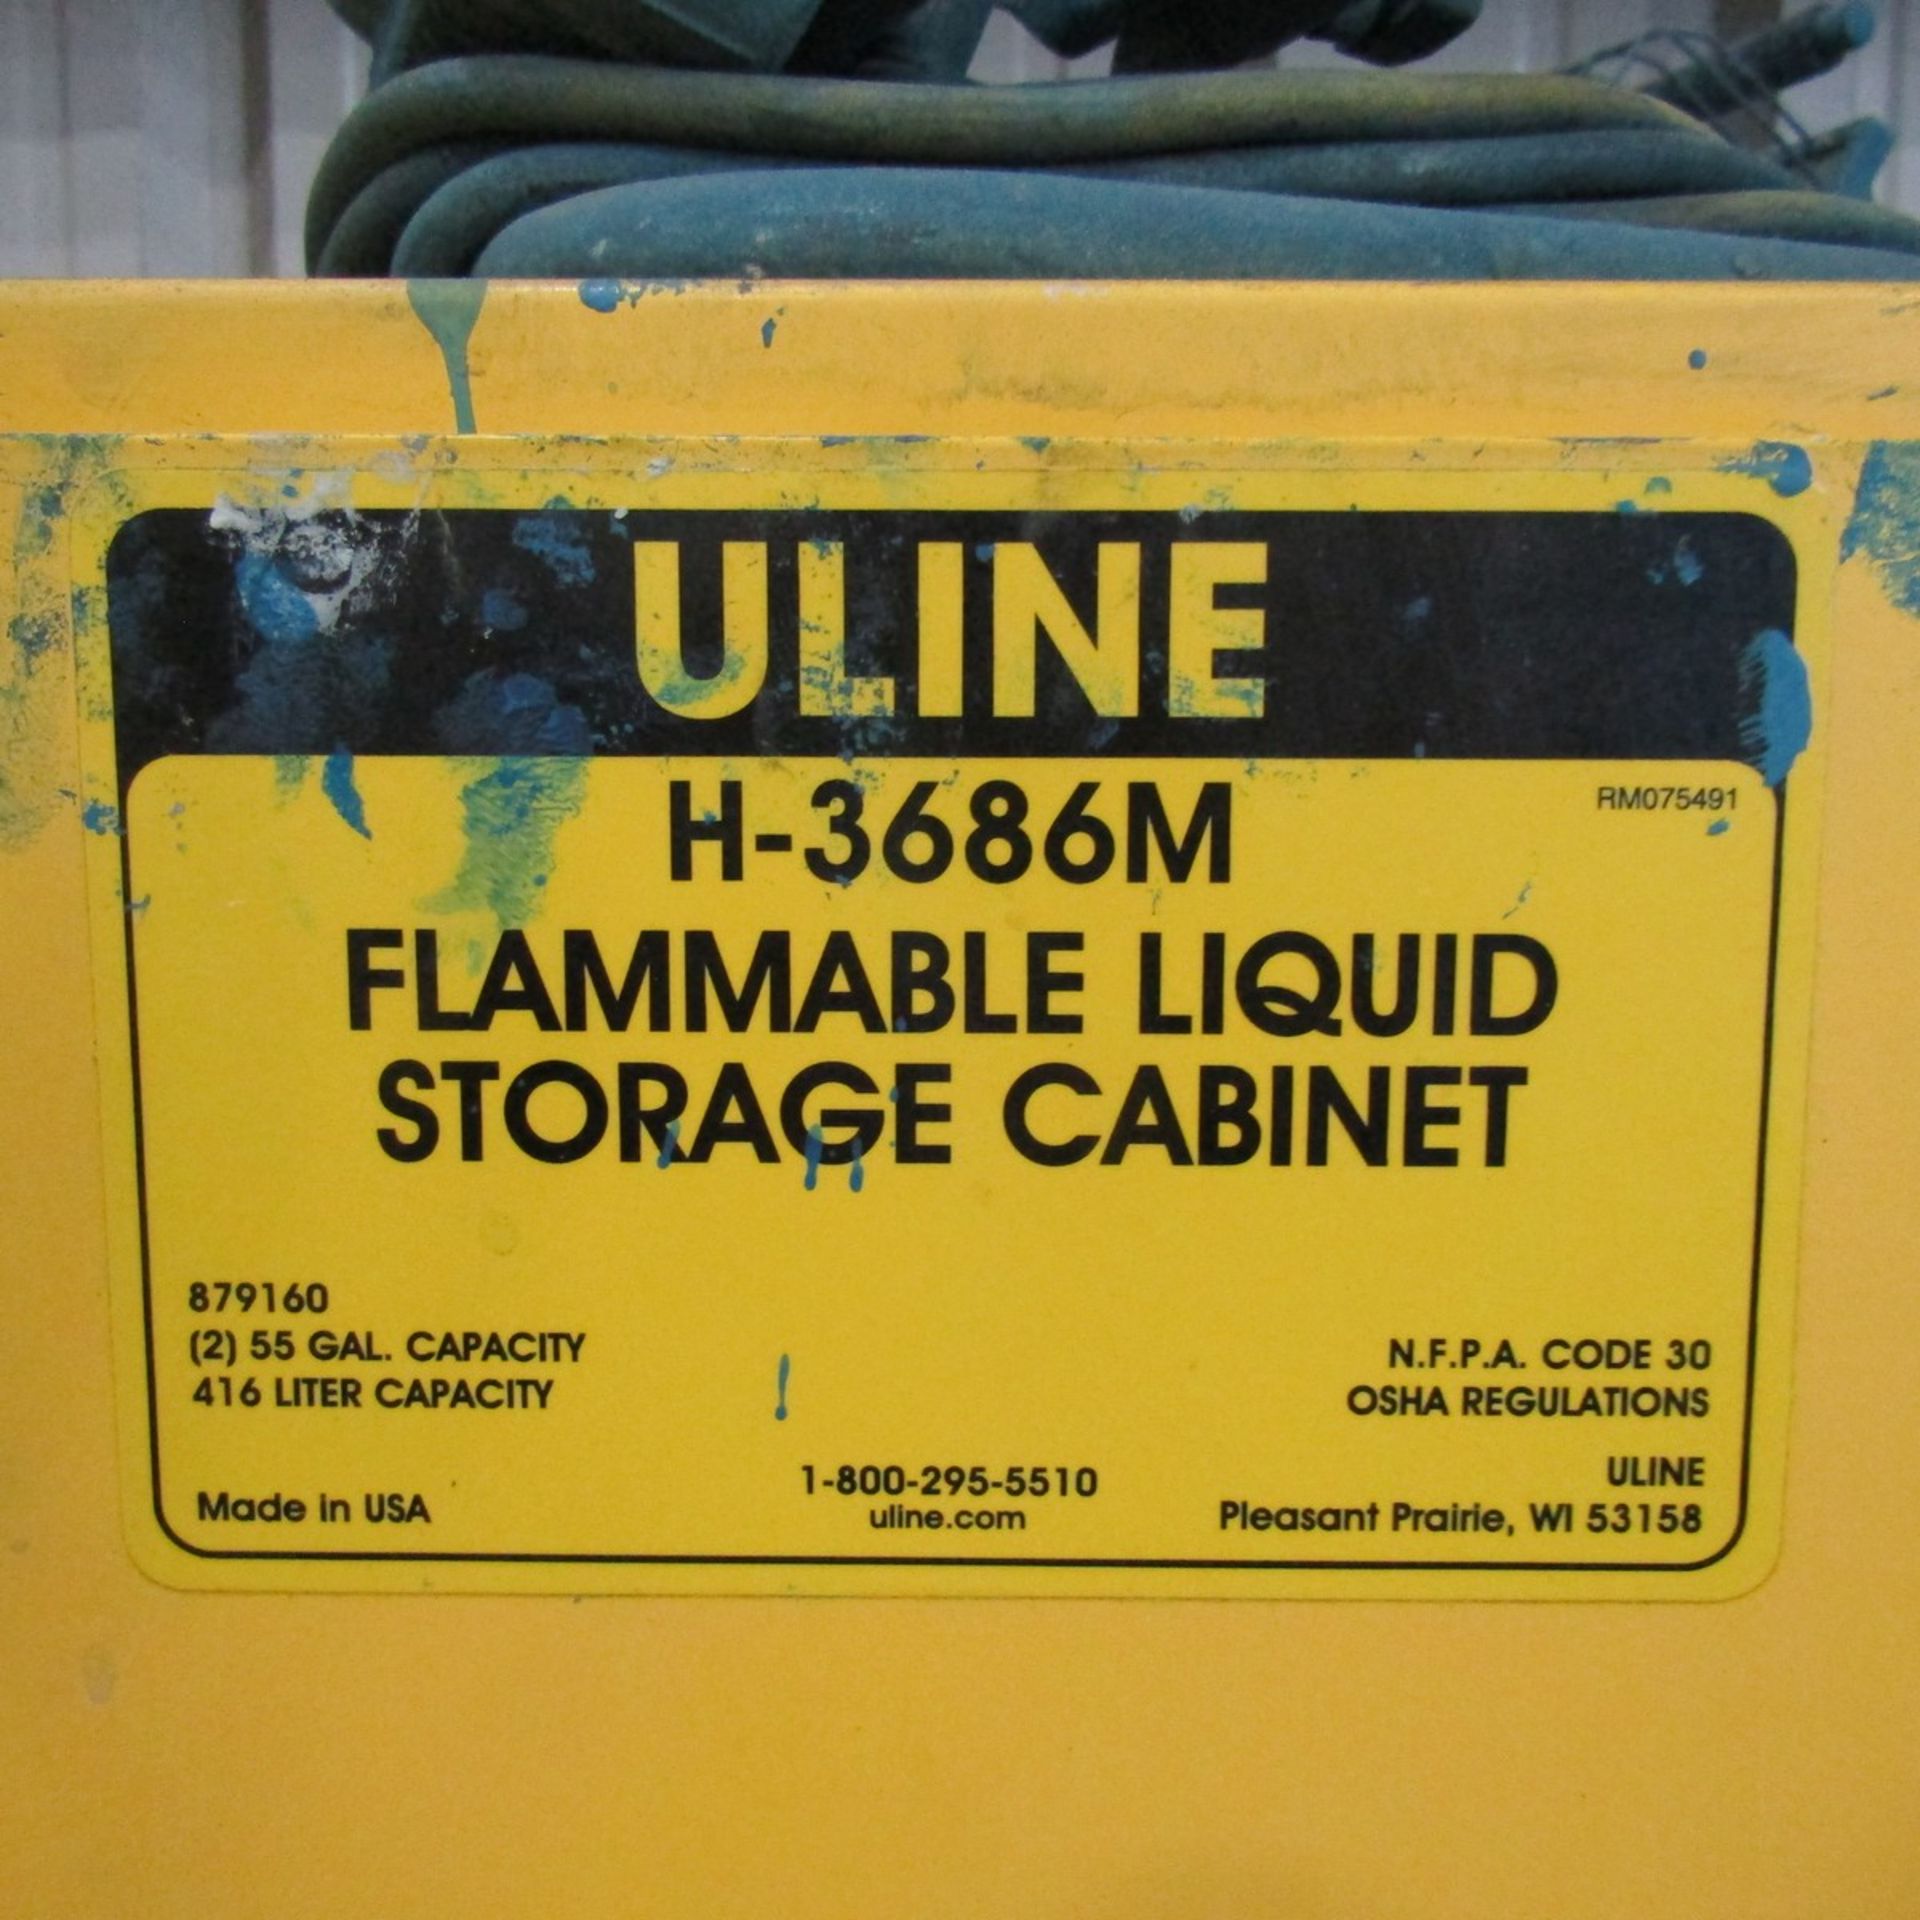 Flame Cabinet - Image 2 of 2